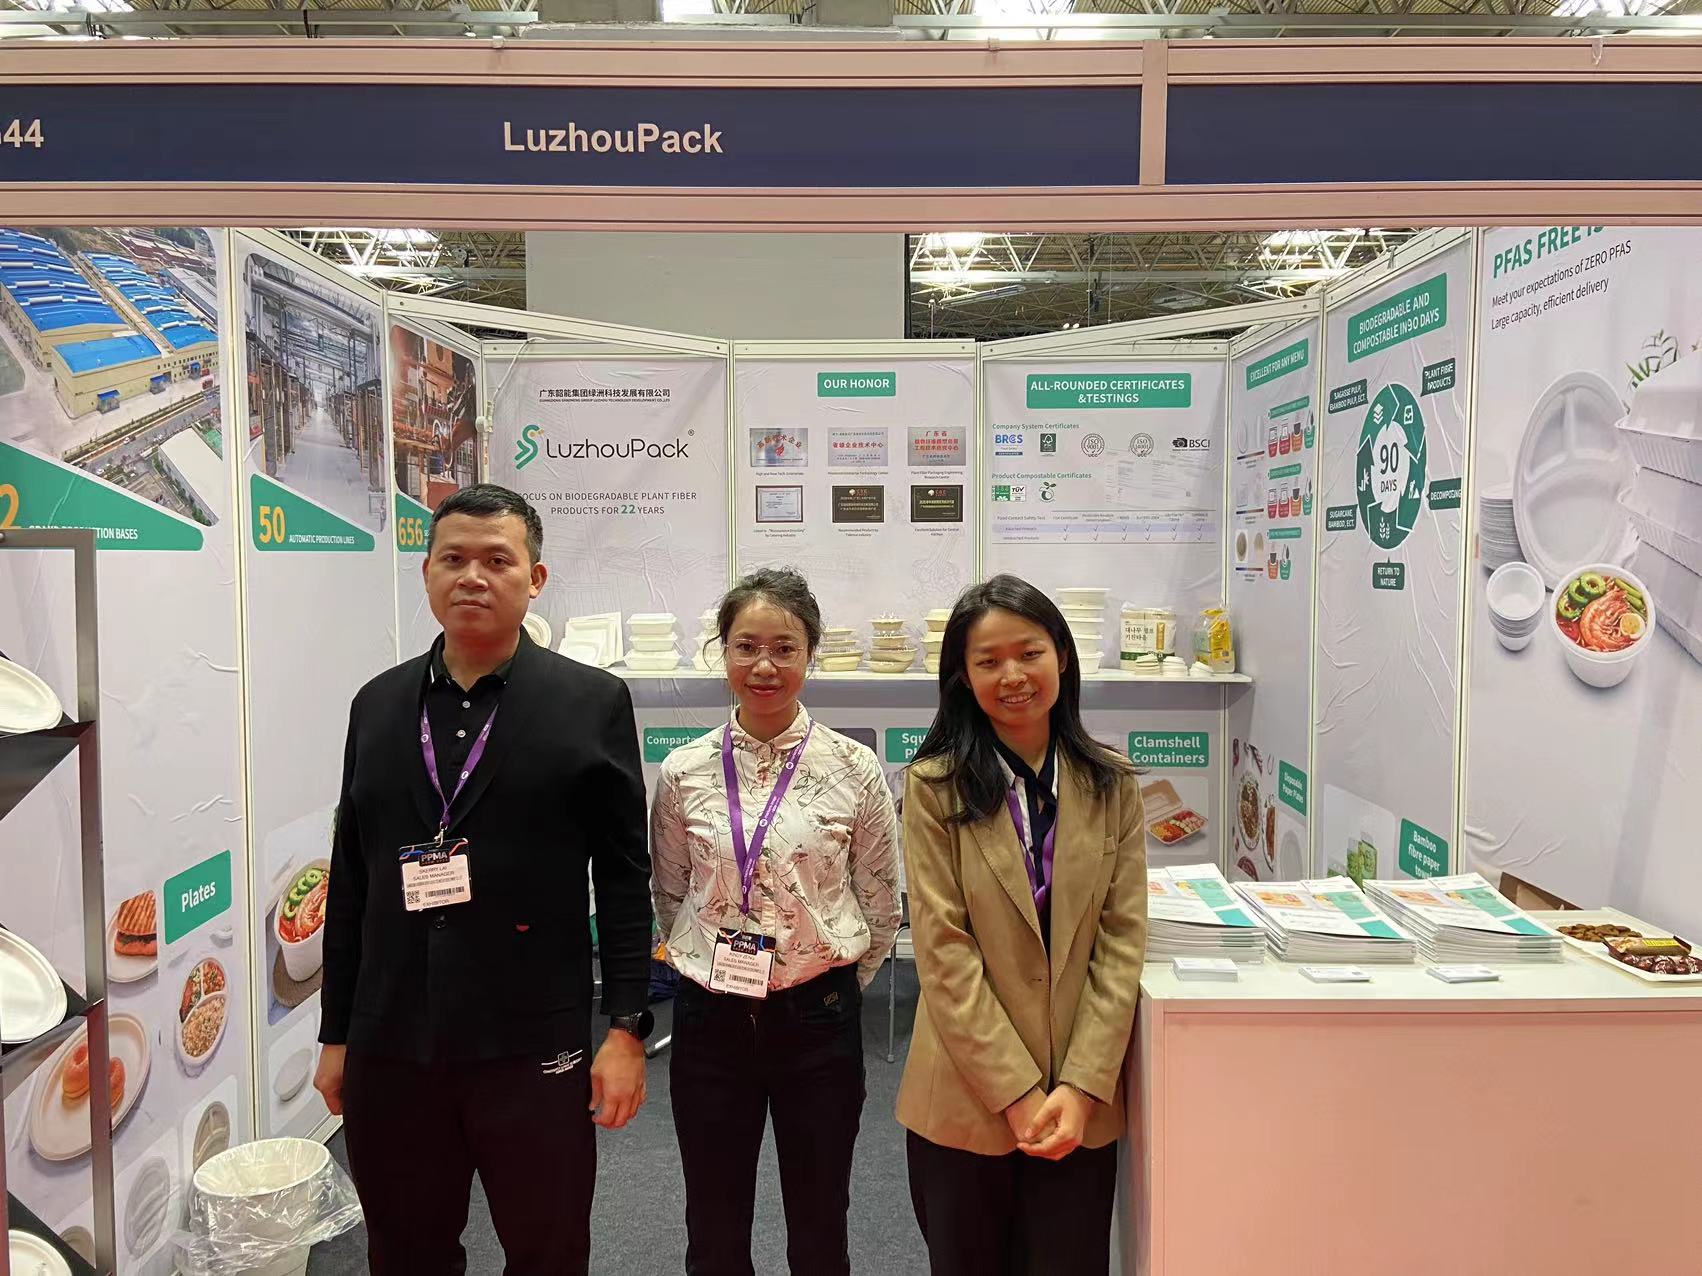 Luzhou Pack was exhibiting successfully at PPMA TOTAL SHOW, NEC, Birmingham, UK in Sep 26 - 28.